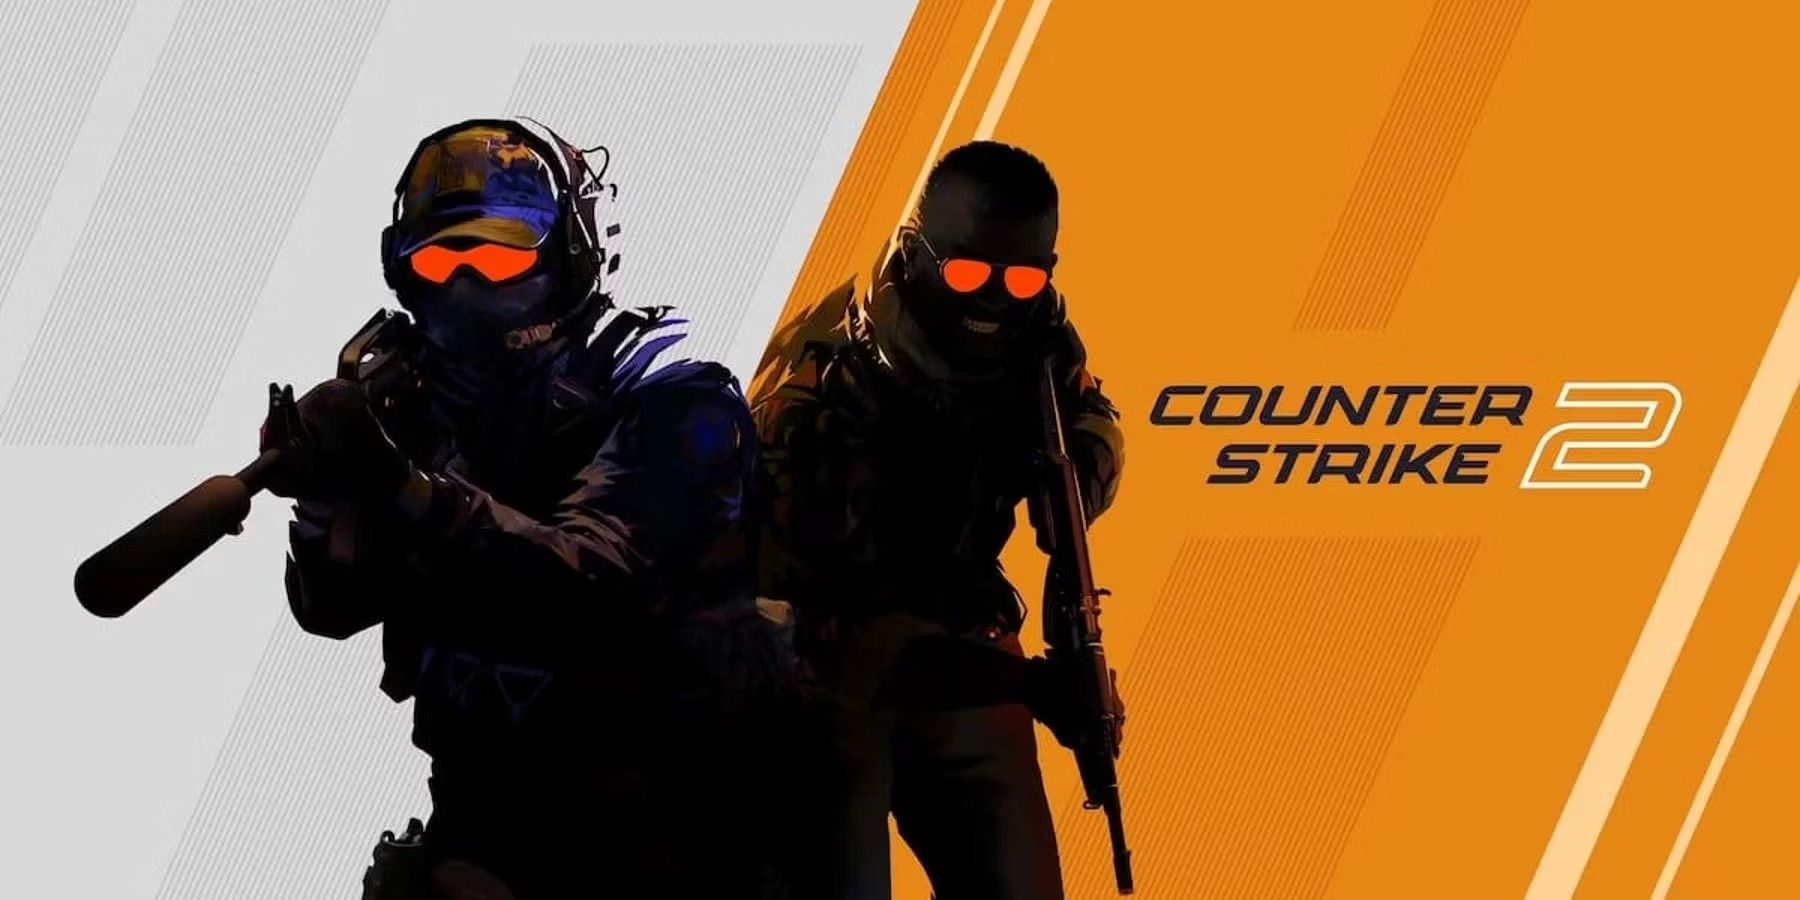 counter-strike-2-lowest-rated-valve-game